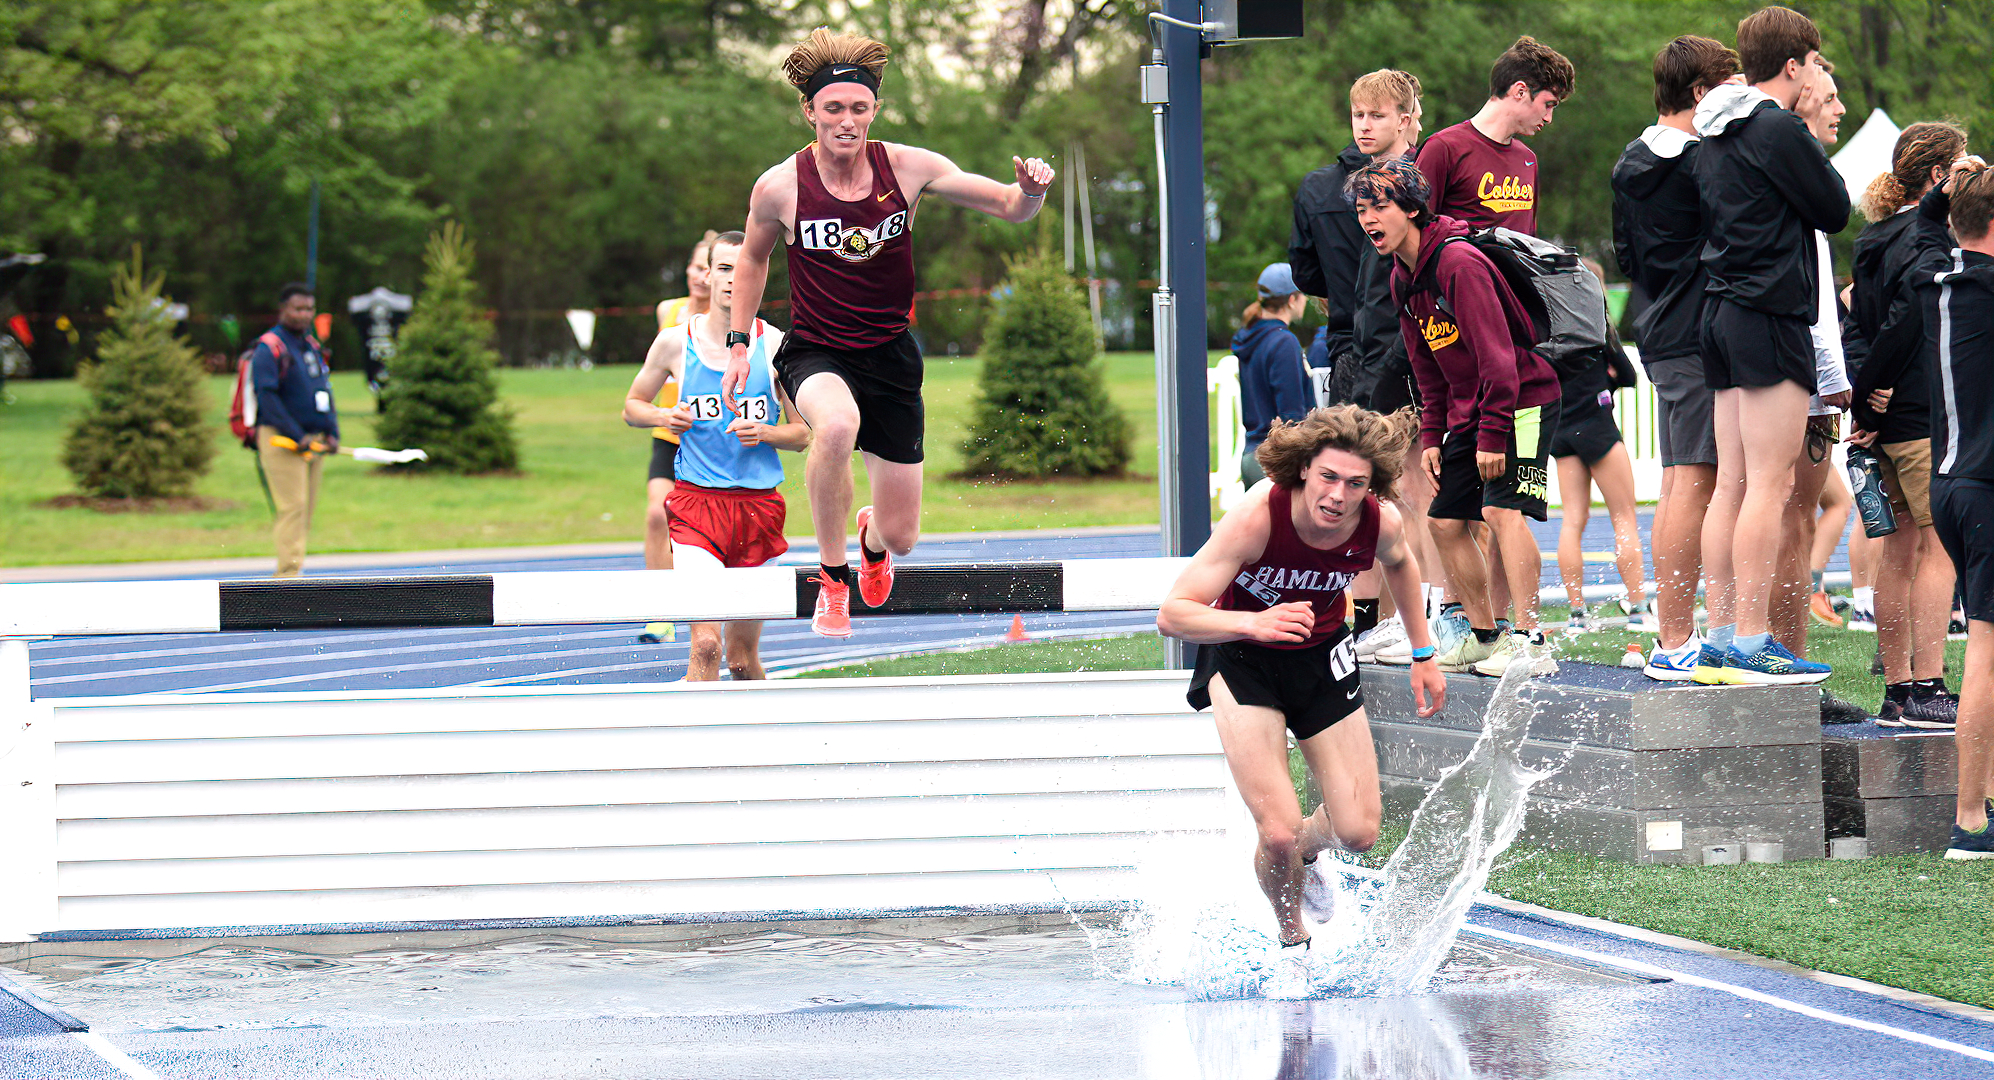 Gavin Groshelle was one of three Cobber steeplechase runners who gave CC a 4-5-6 finish in the event at the Hamline Invite.